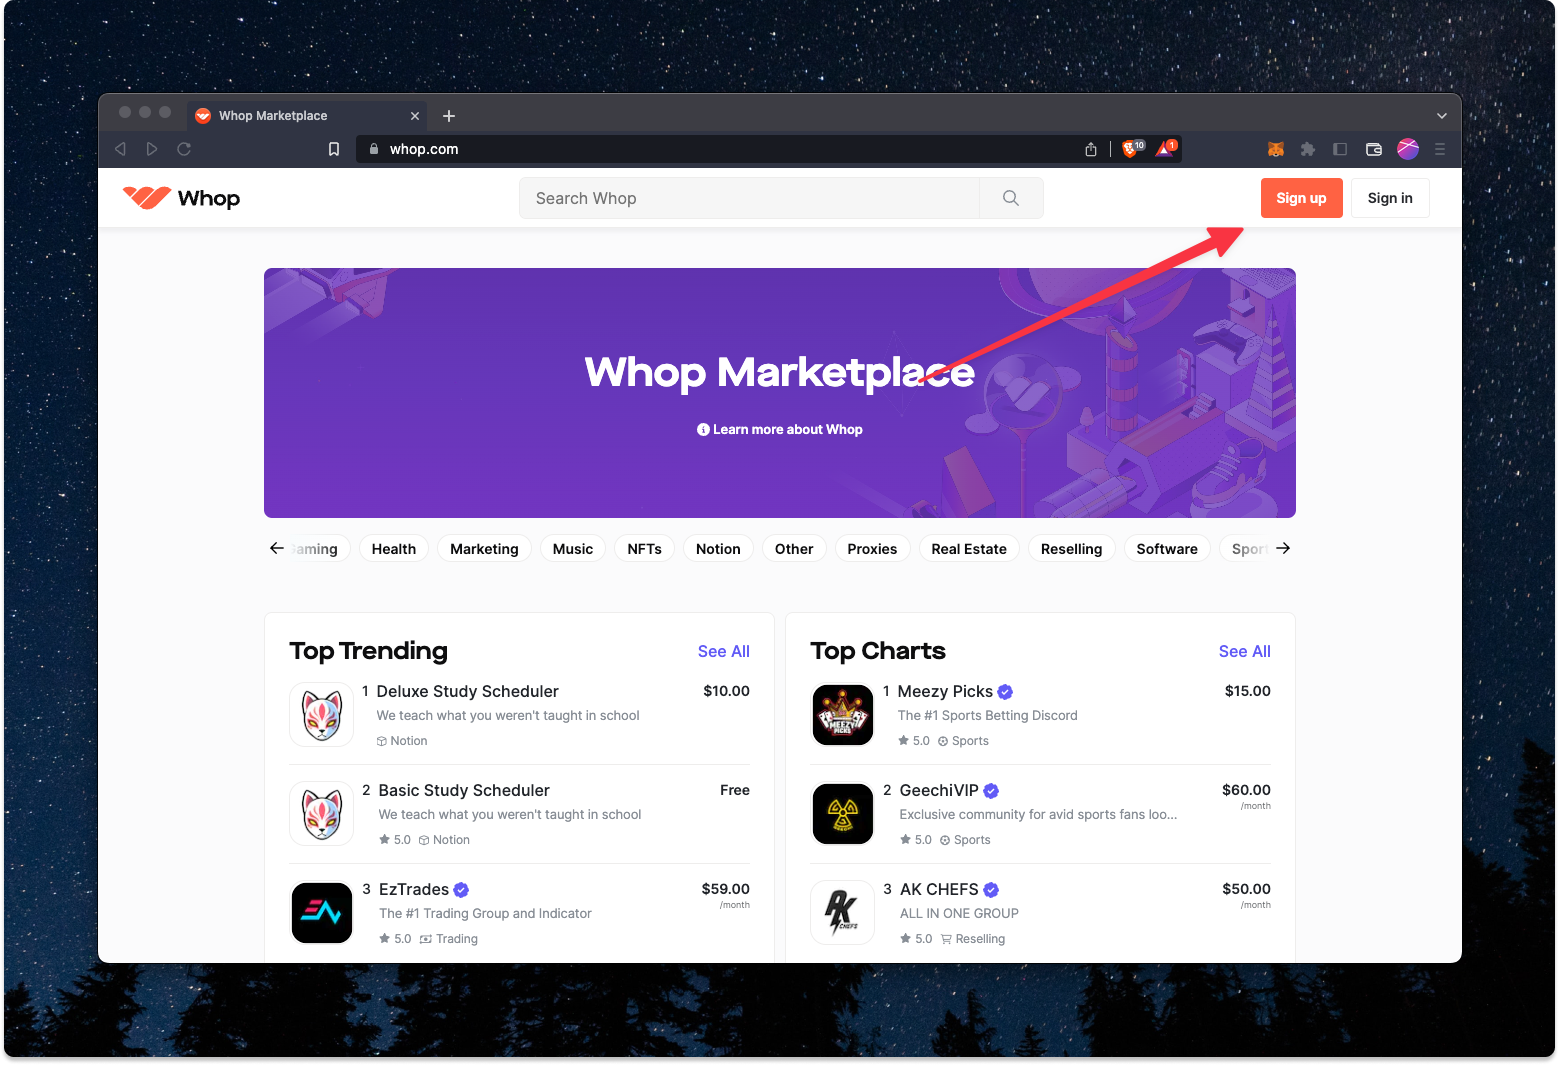 How to sign up for a whop marketplace account